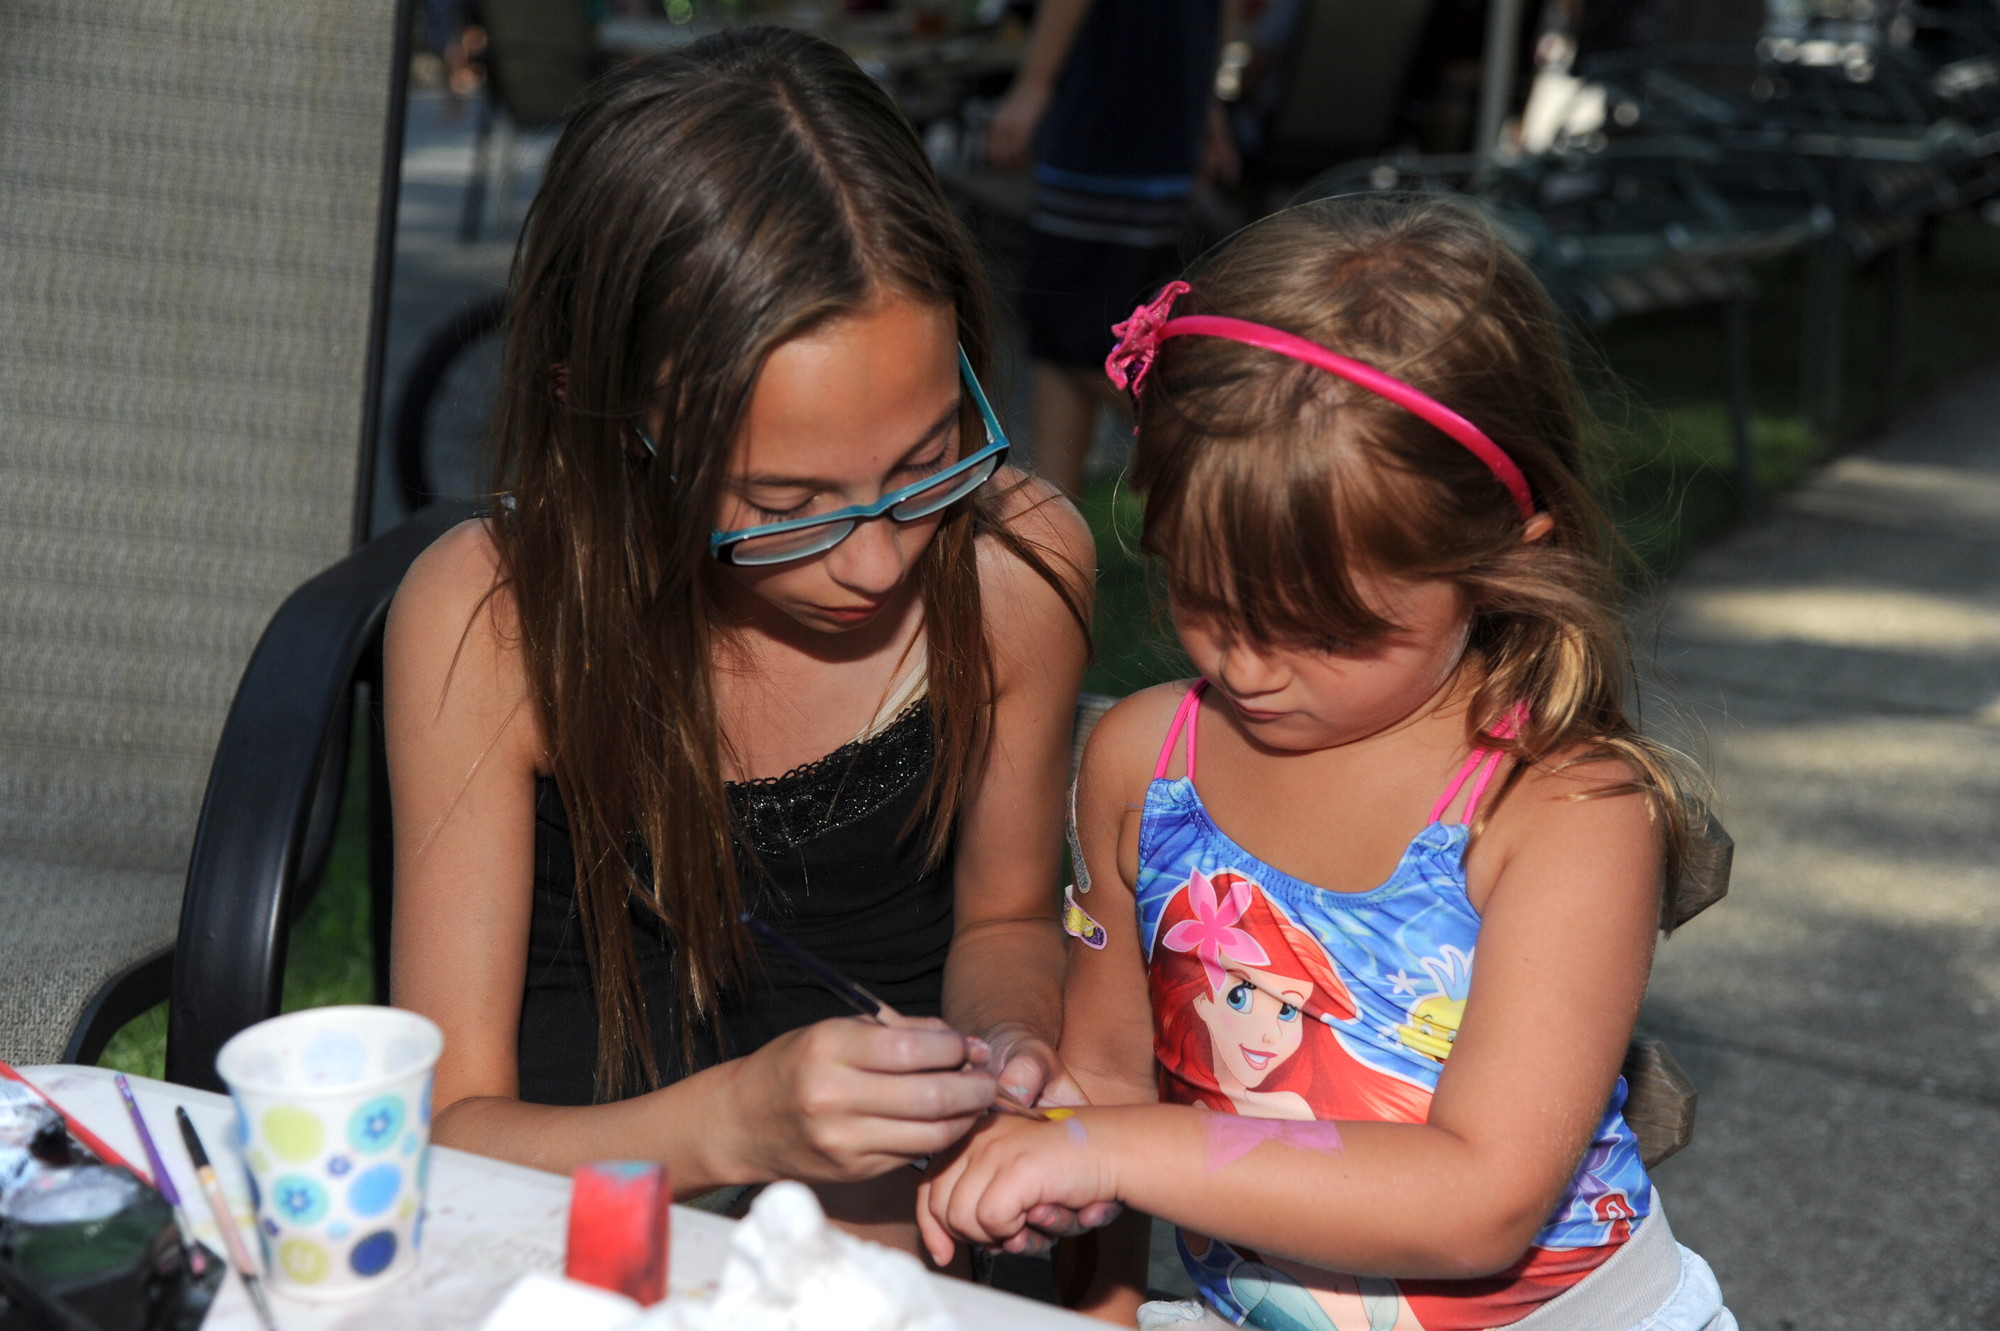 Gigi Gerbe, 4, had her hand painted by Cabrera at the Auburn Road block party in Wantagh on Aug. 1.